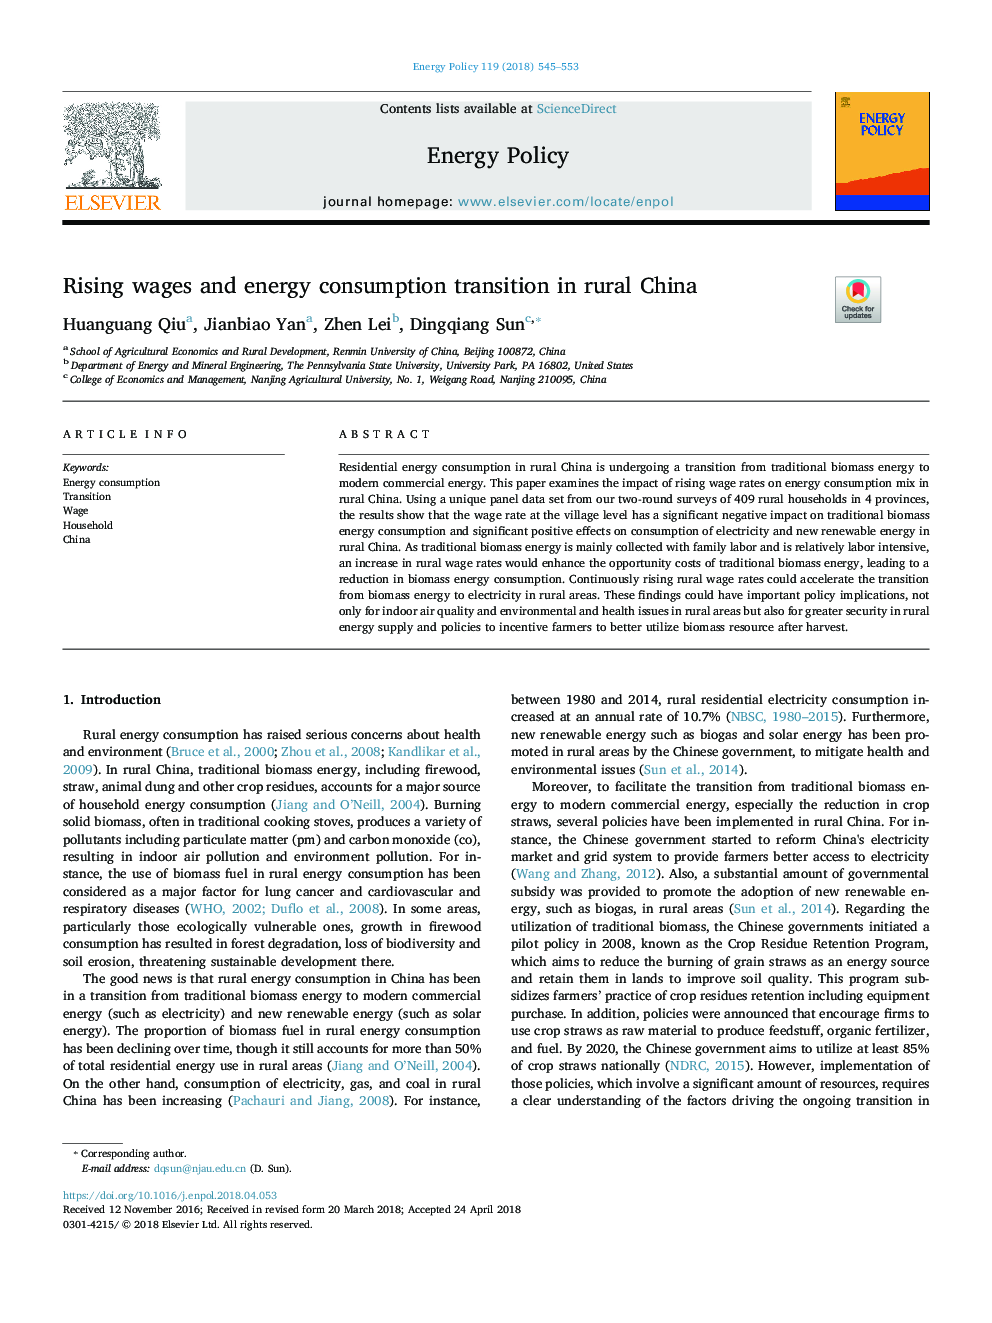 Rising wages and energy consumption transition in rural China